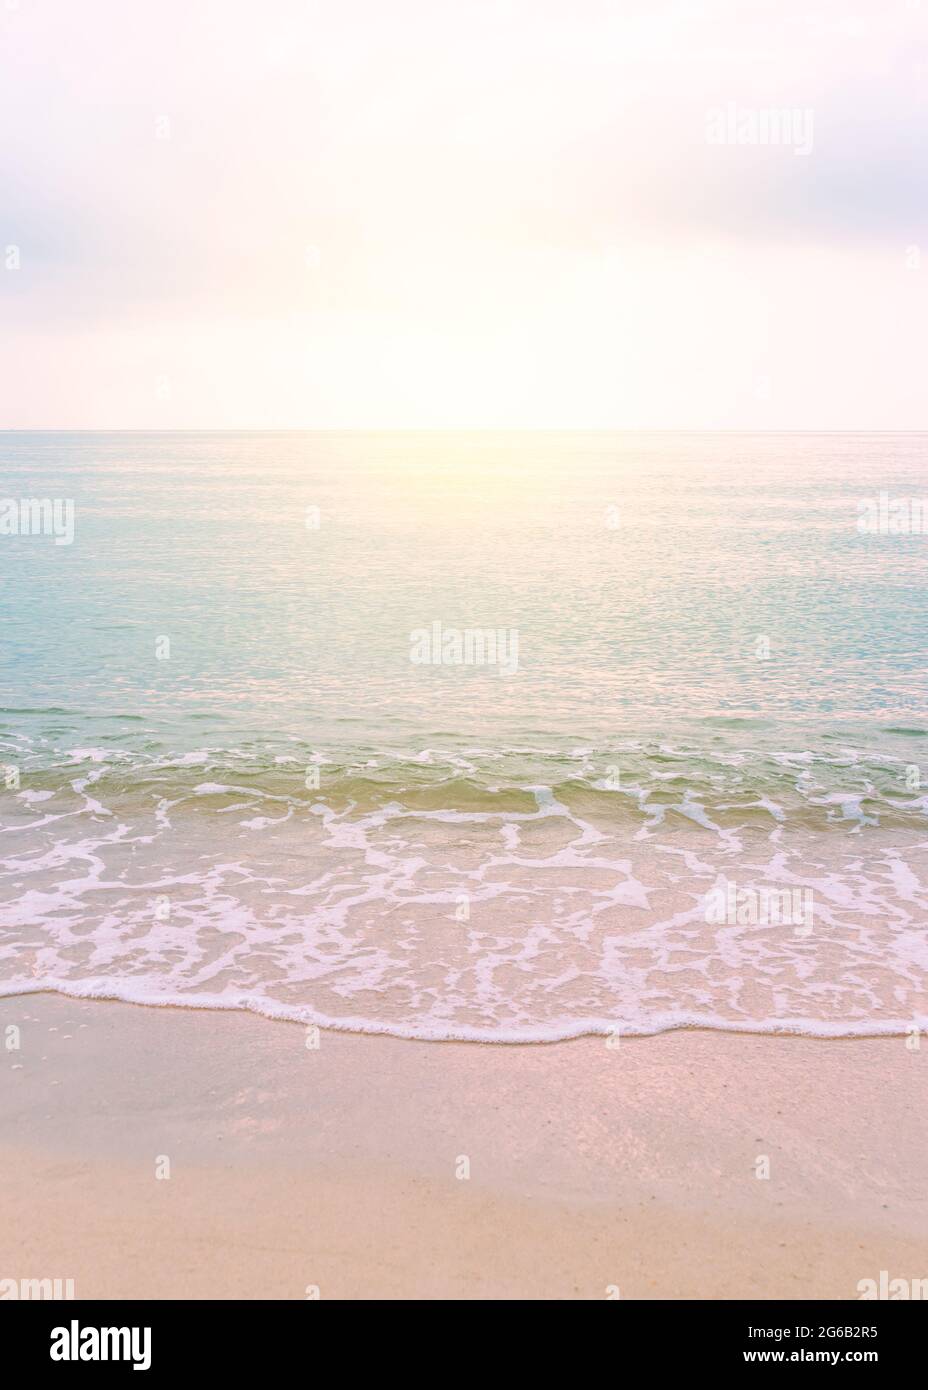 Beautiful tranquil sea beach scene at sunset with warm color grading,  reflection on the water surface, vertical image Stock Photo - Alamy